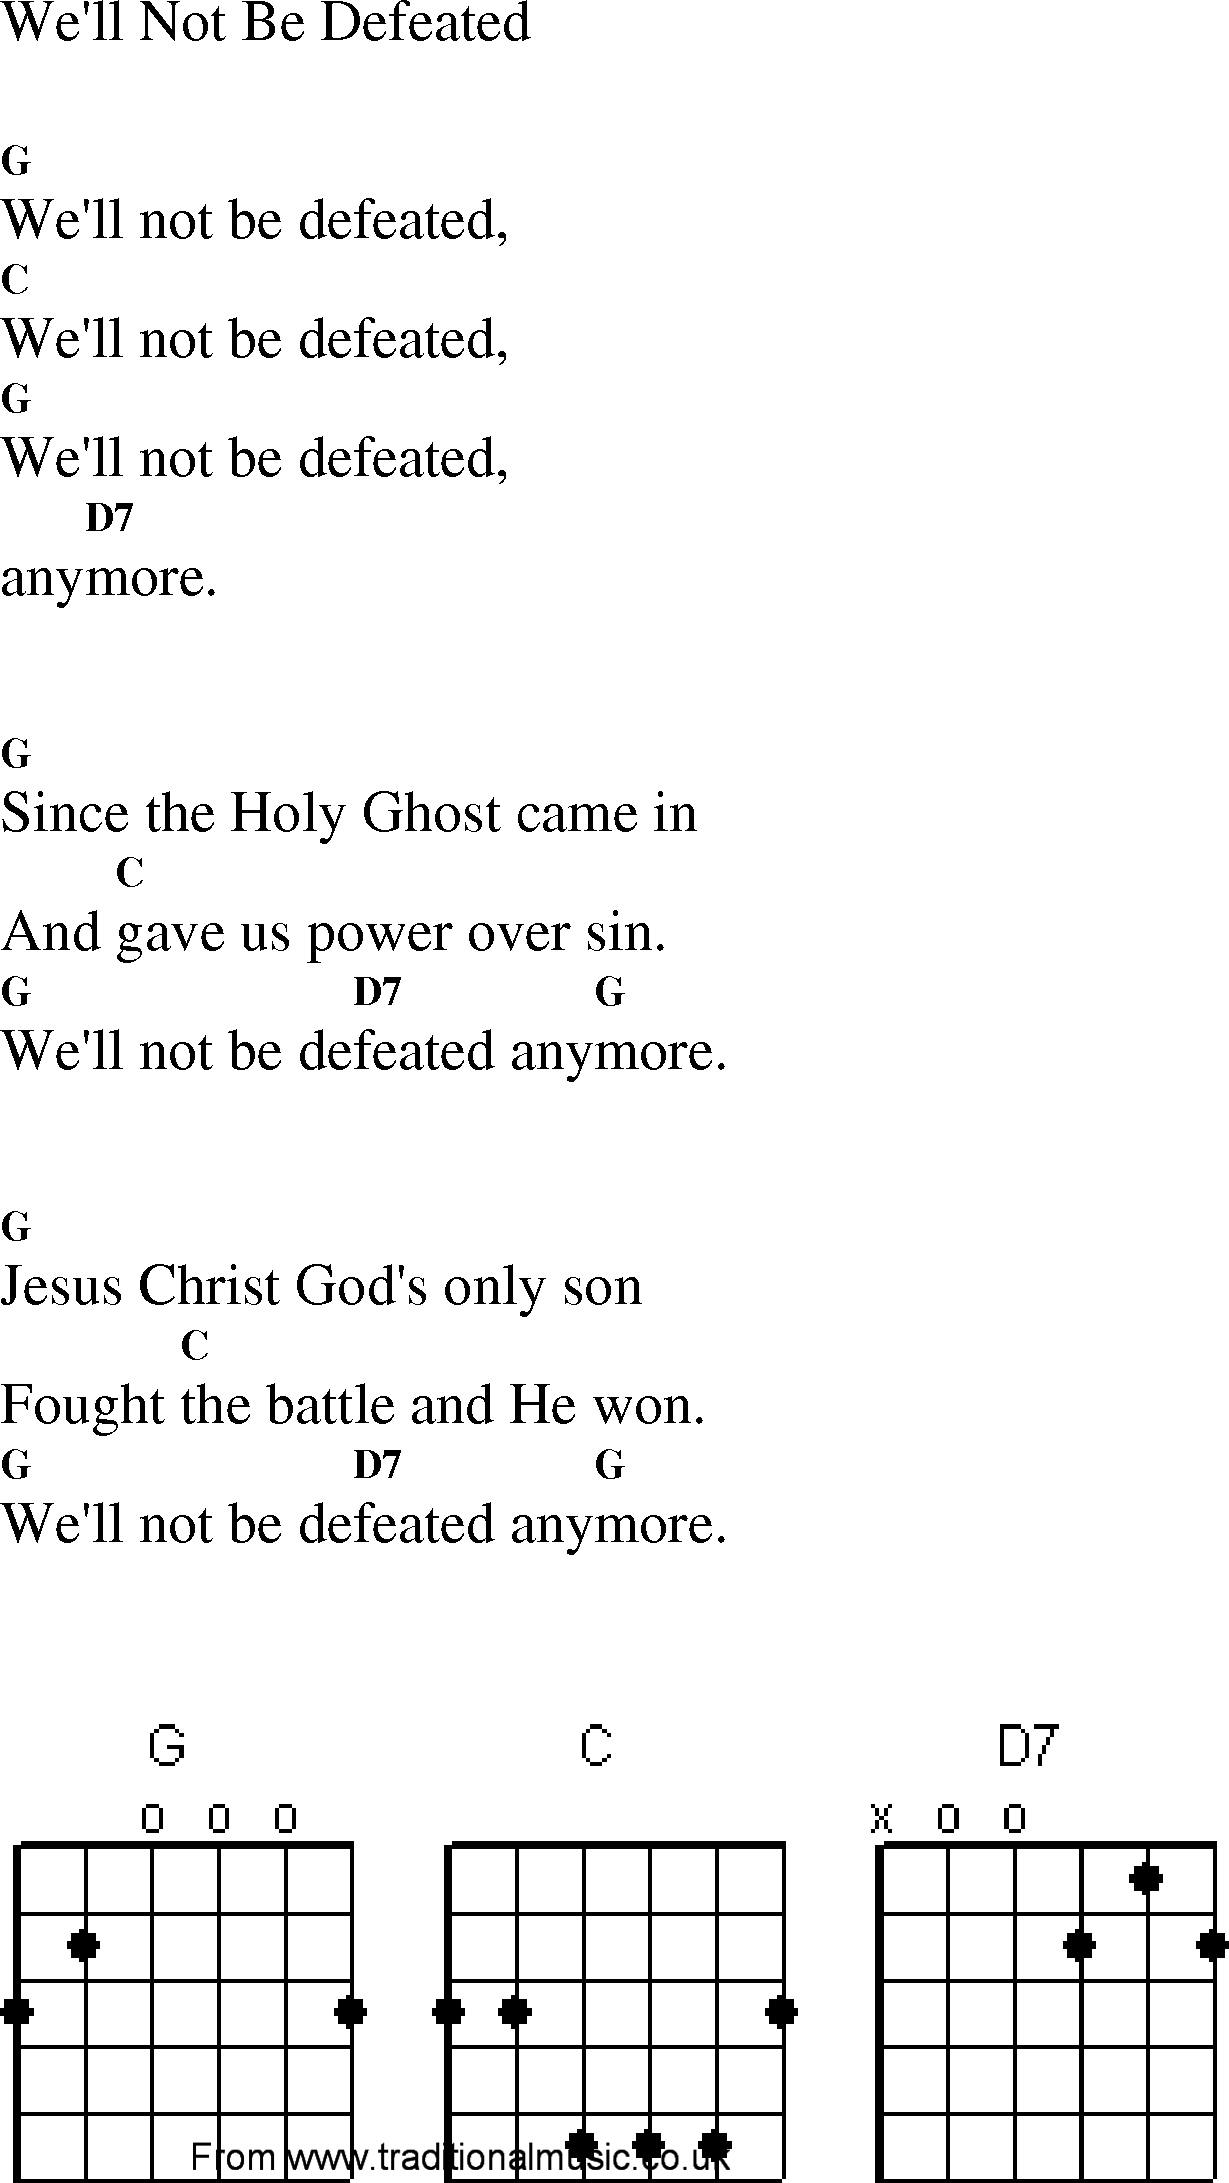 Gospel Song: well_not_be_defeated, lyrics and chords.